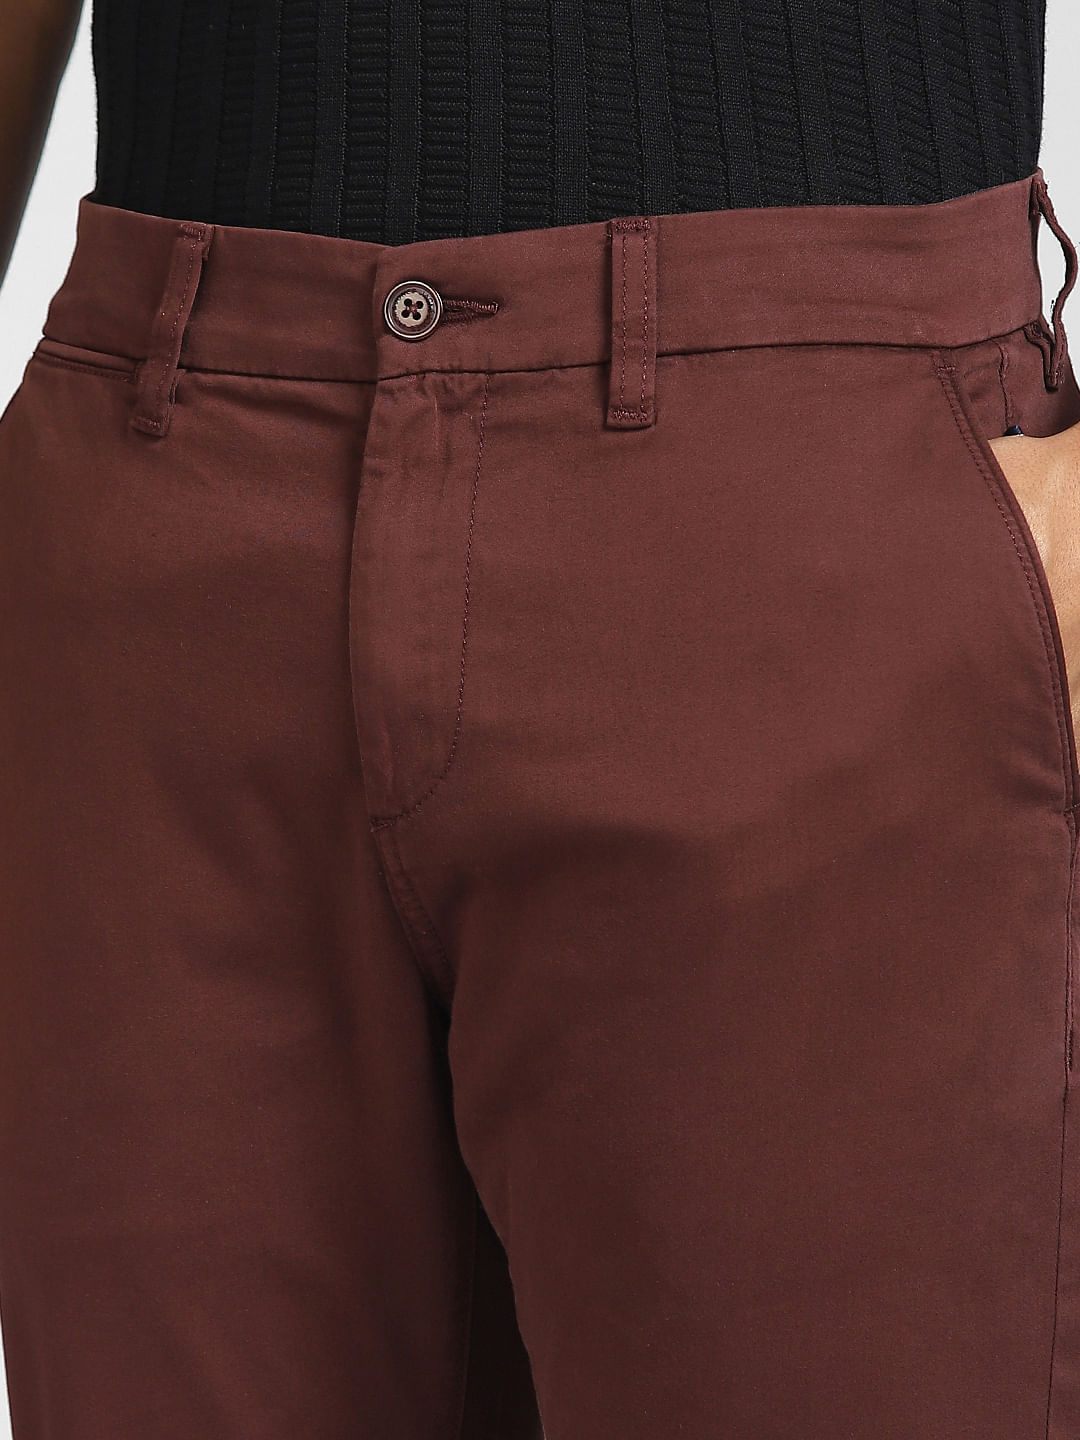 Burgundy Slim Fit Cotton Pants for Men by GentWith  Worldwide Shipping